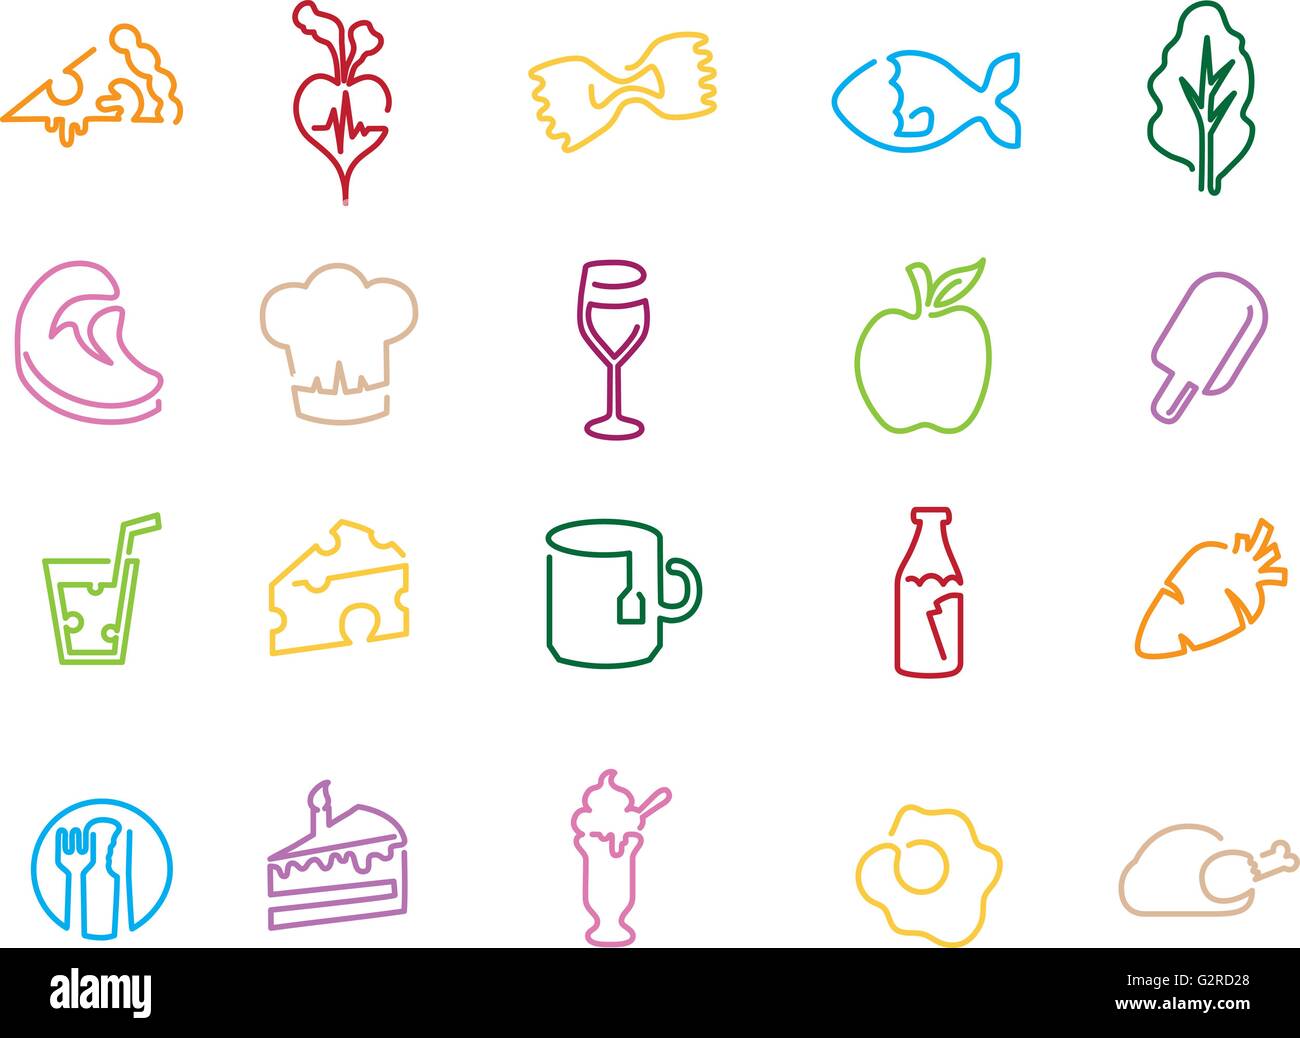 Illustration Of Icons Related To Food, Drink And Diet Stock Vector